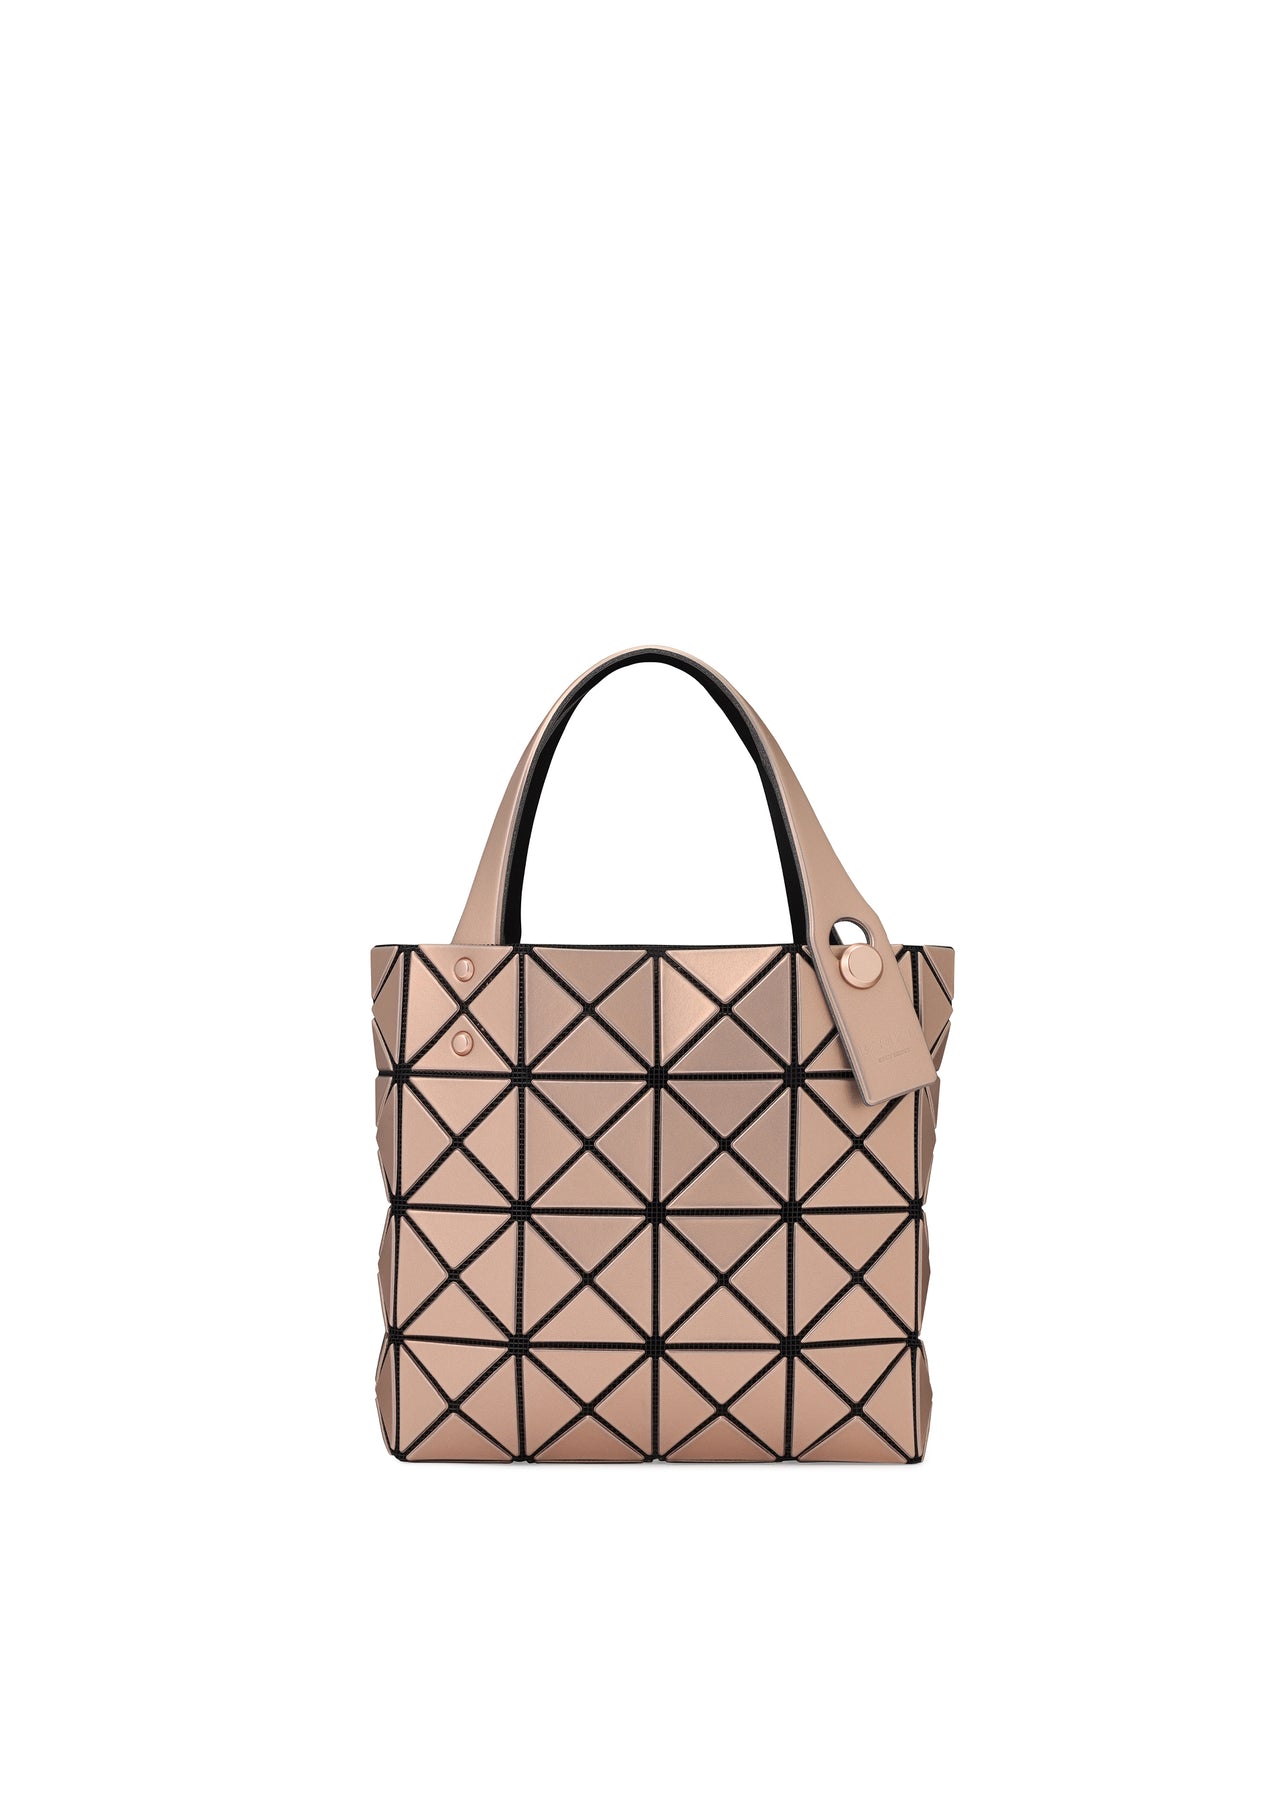 LUCENT BOXY MINI TOTE BAG | The official ISSEY MIYAKE ONLINE STORE 